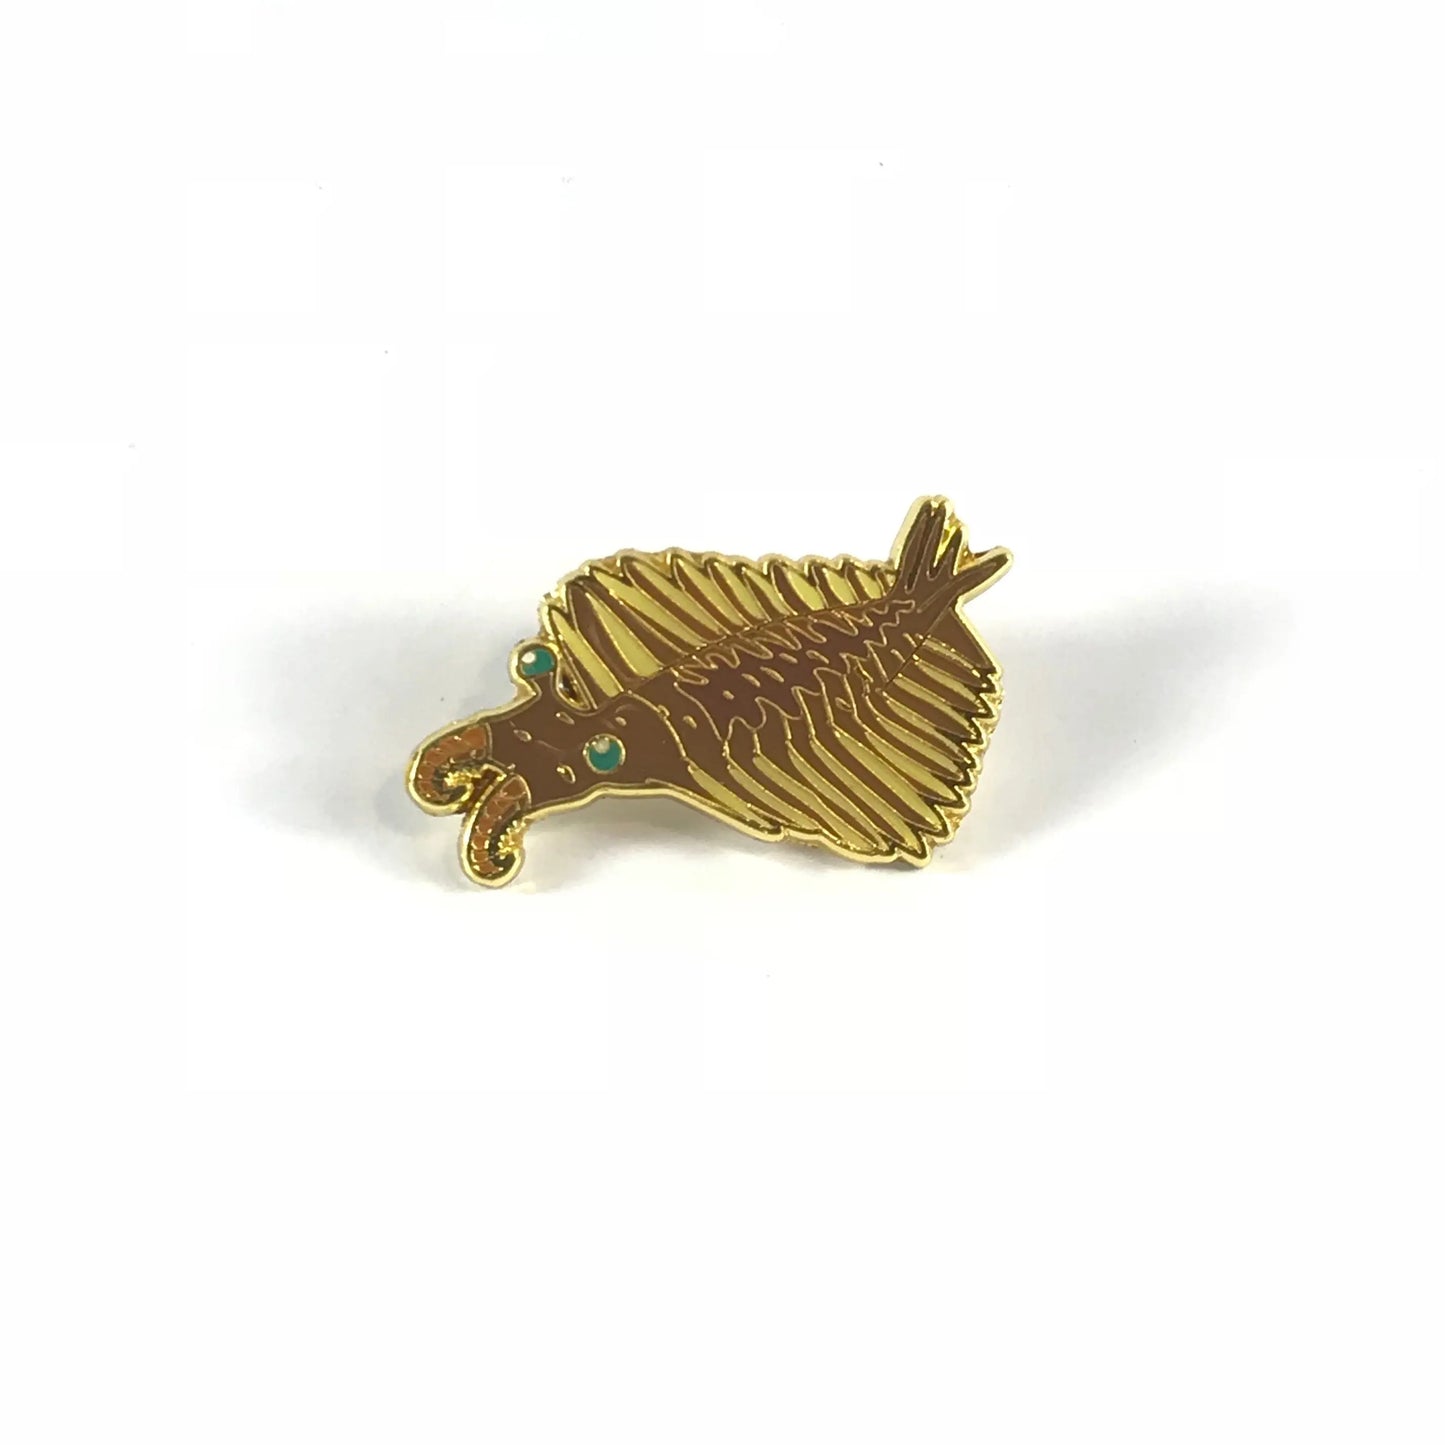 Anomalocaris Enamel Pin - THE STEMCELL SCIENCE SHOP